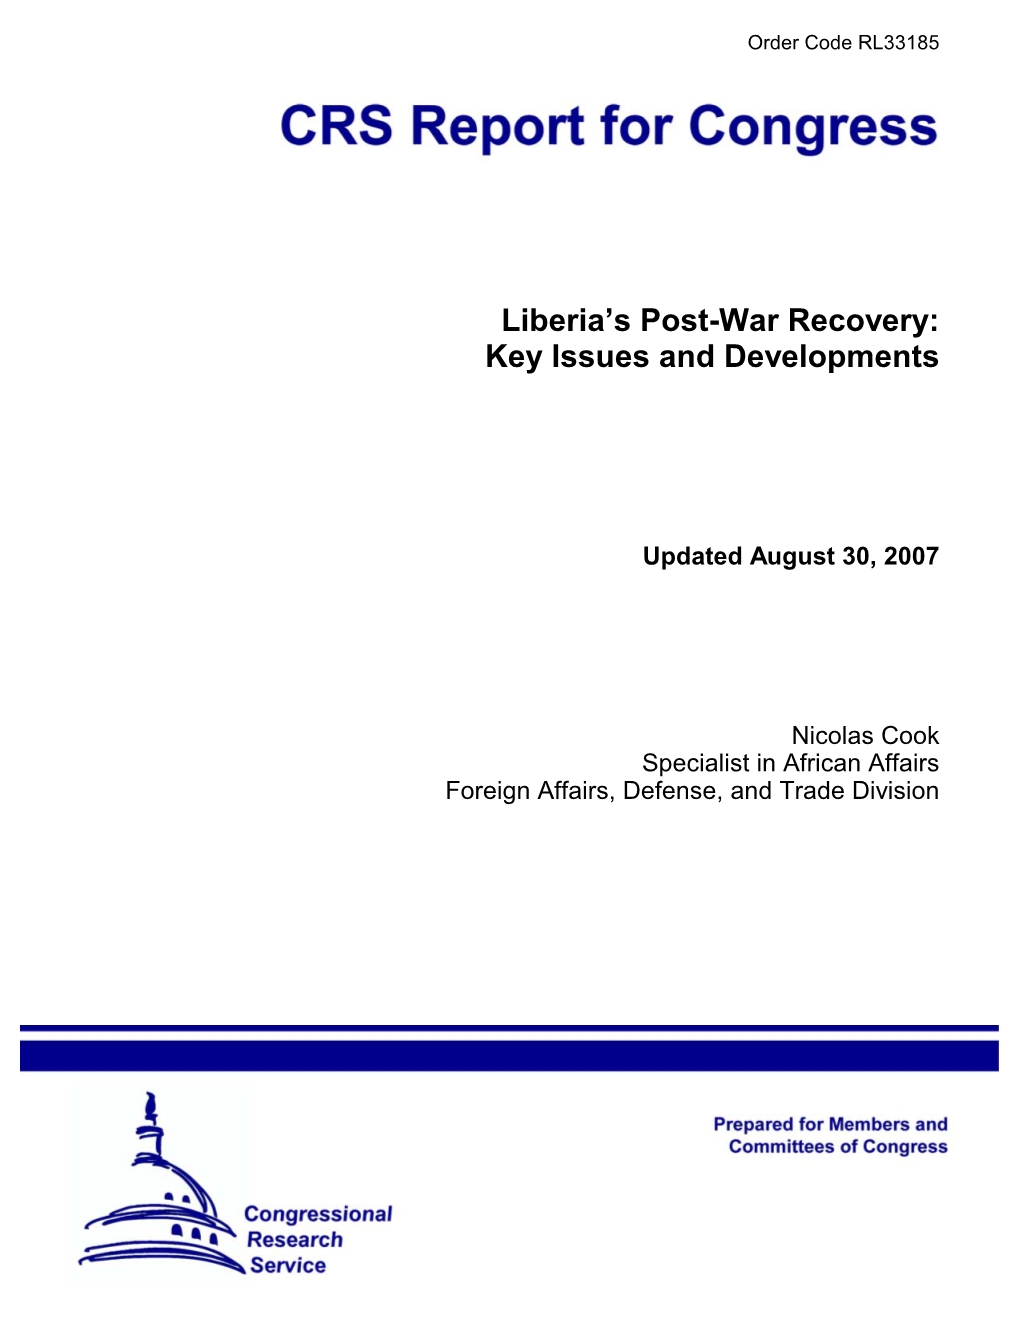 Liberia's Post-War Recovery: Key Issues And